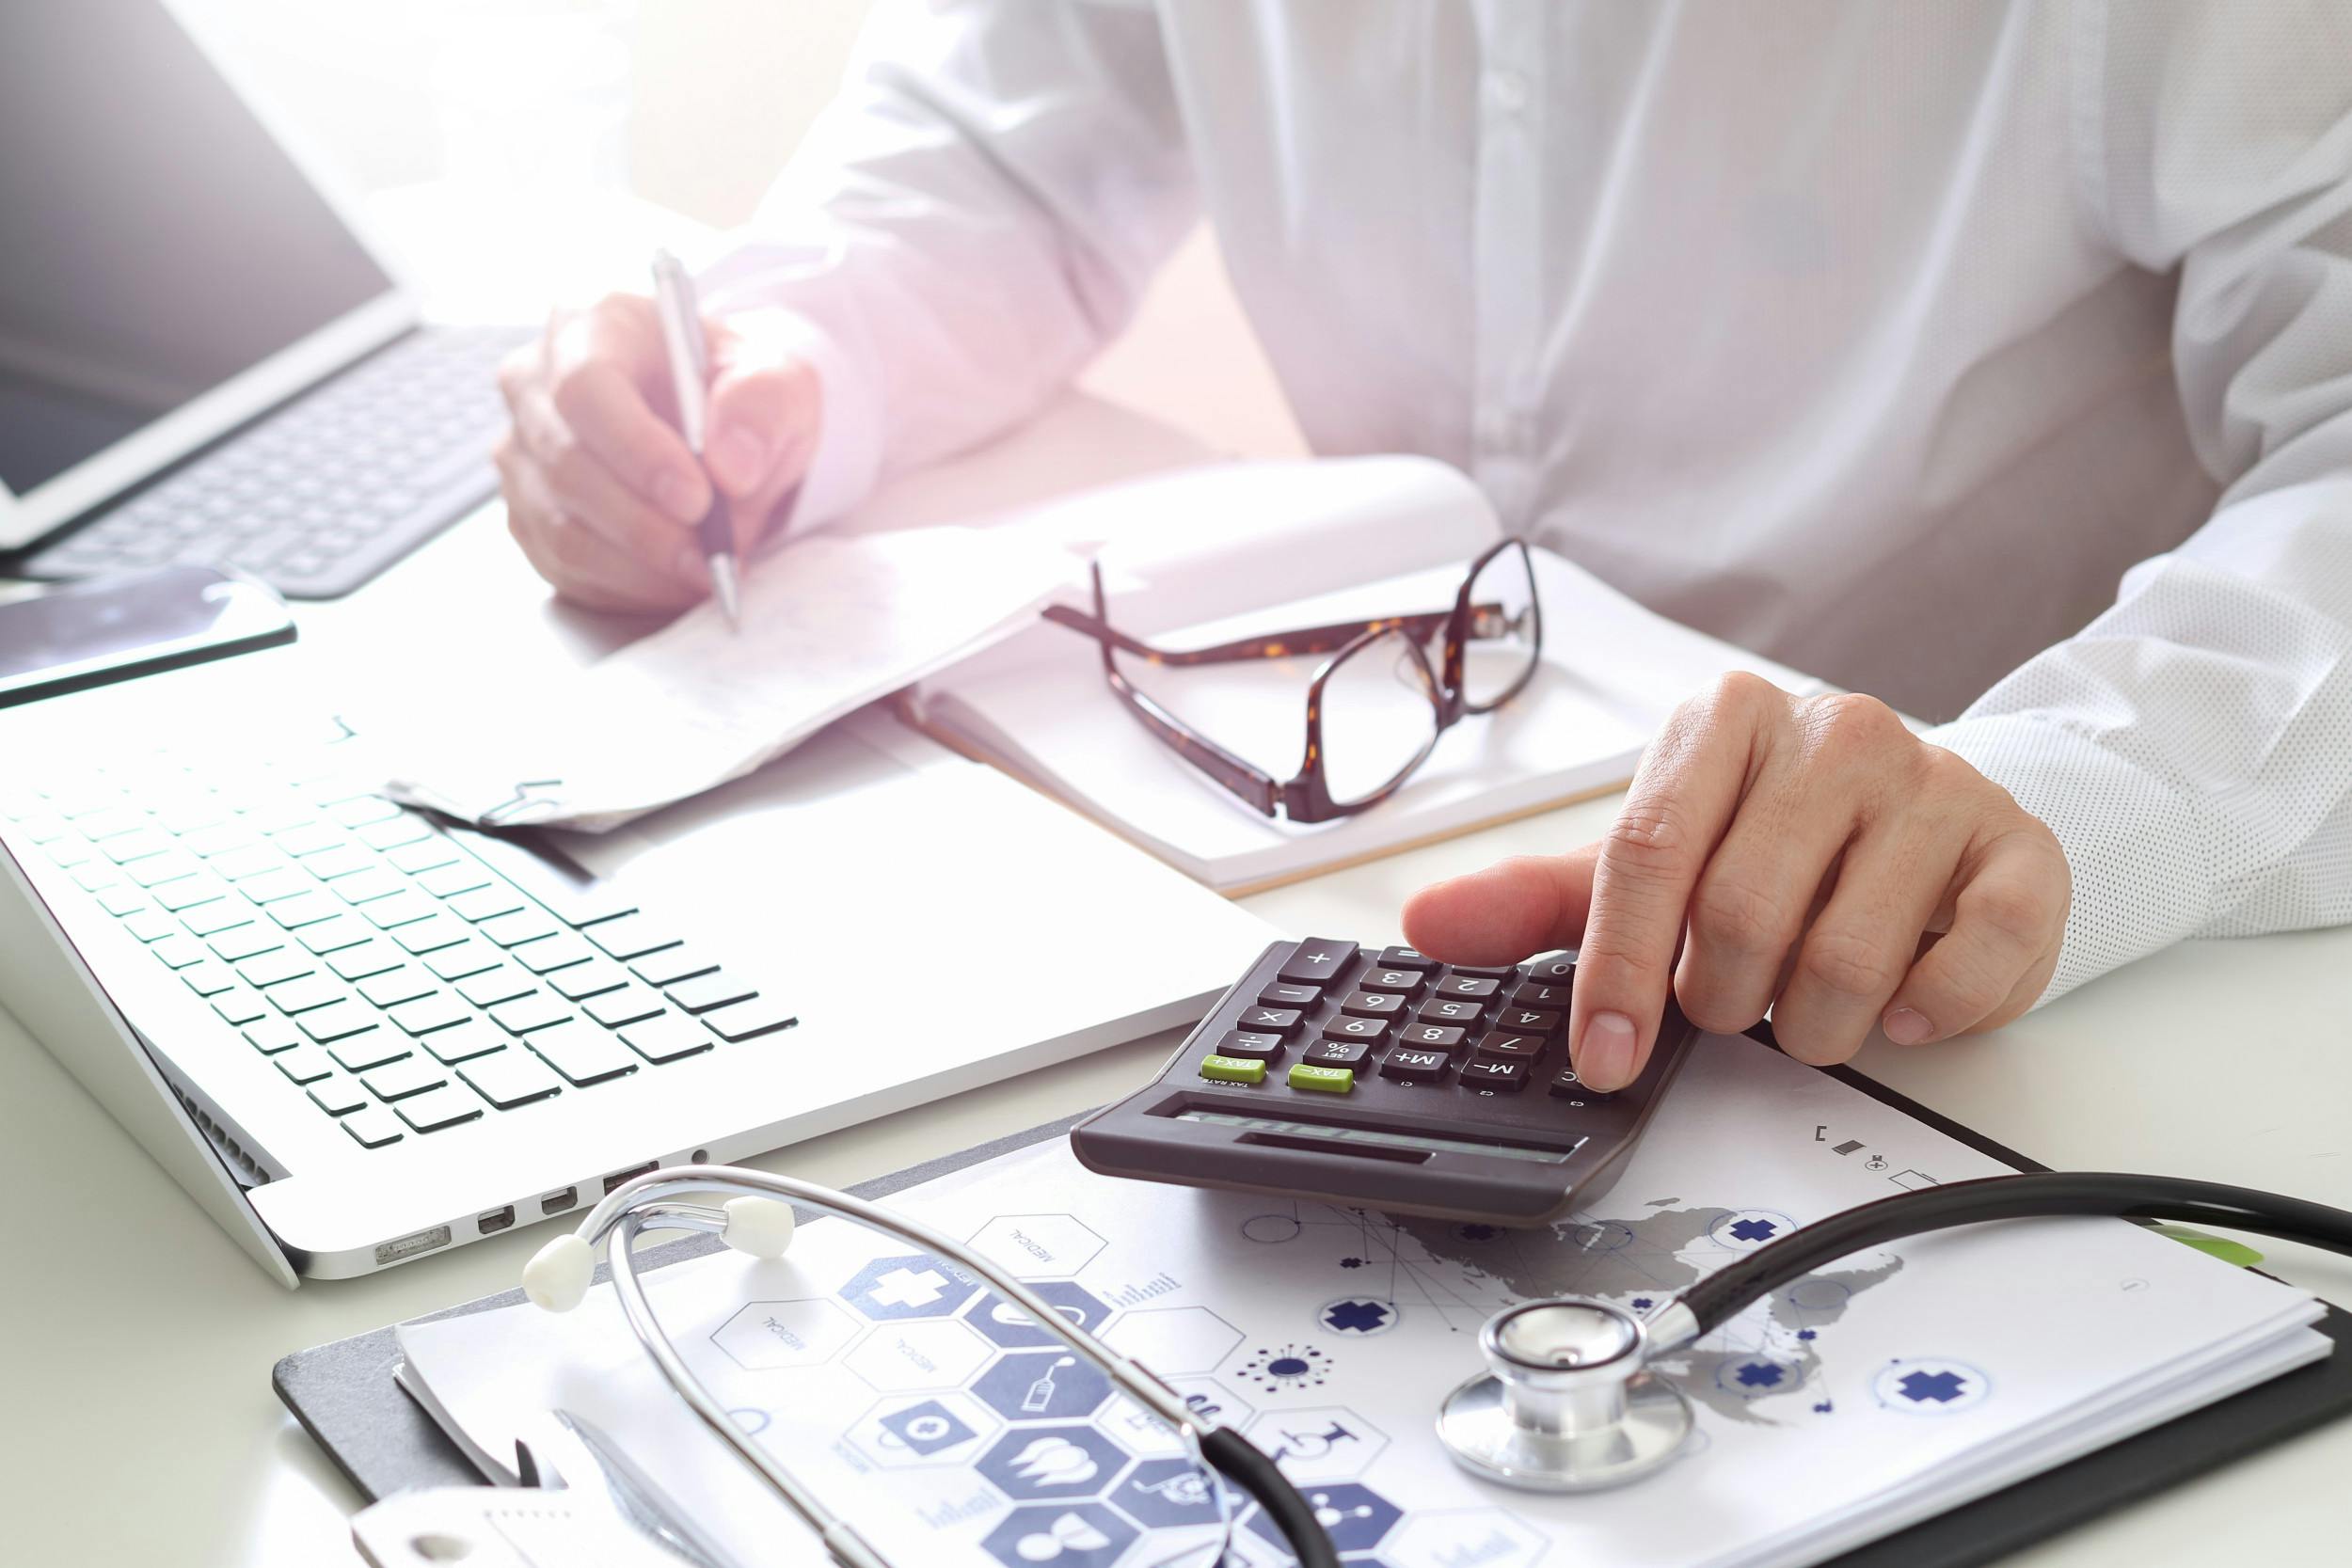 A high deductible health plan (HDHP) or Curative for your employees?